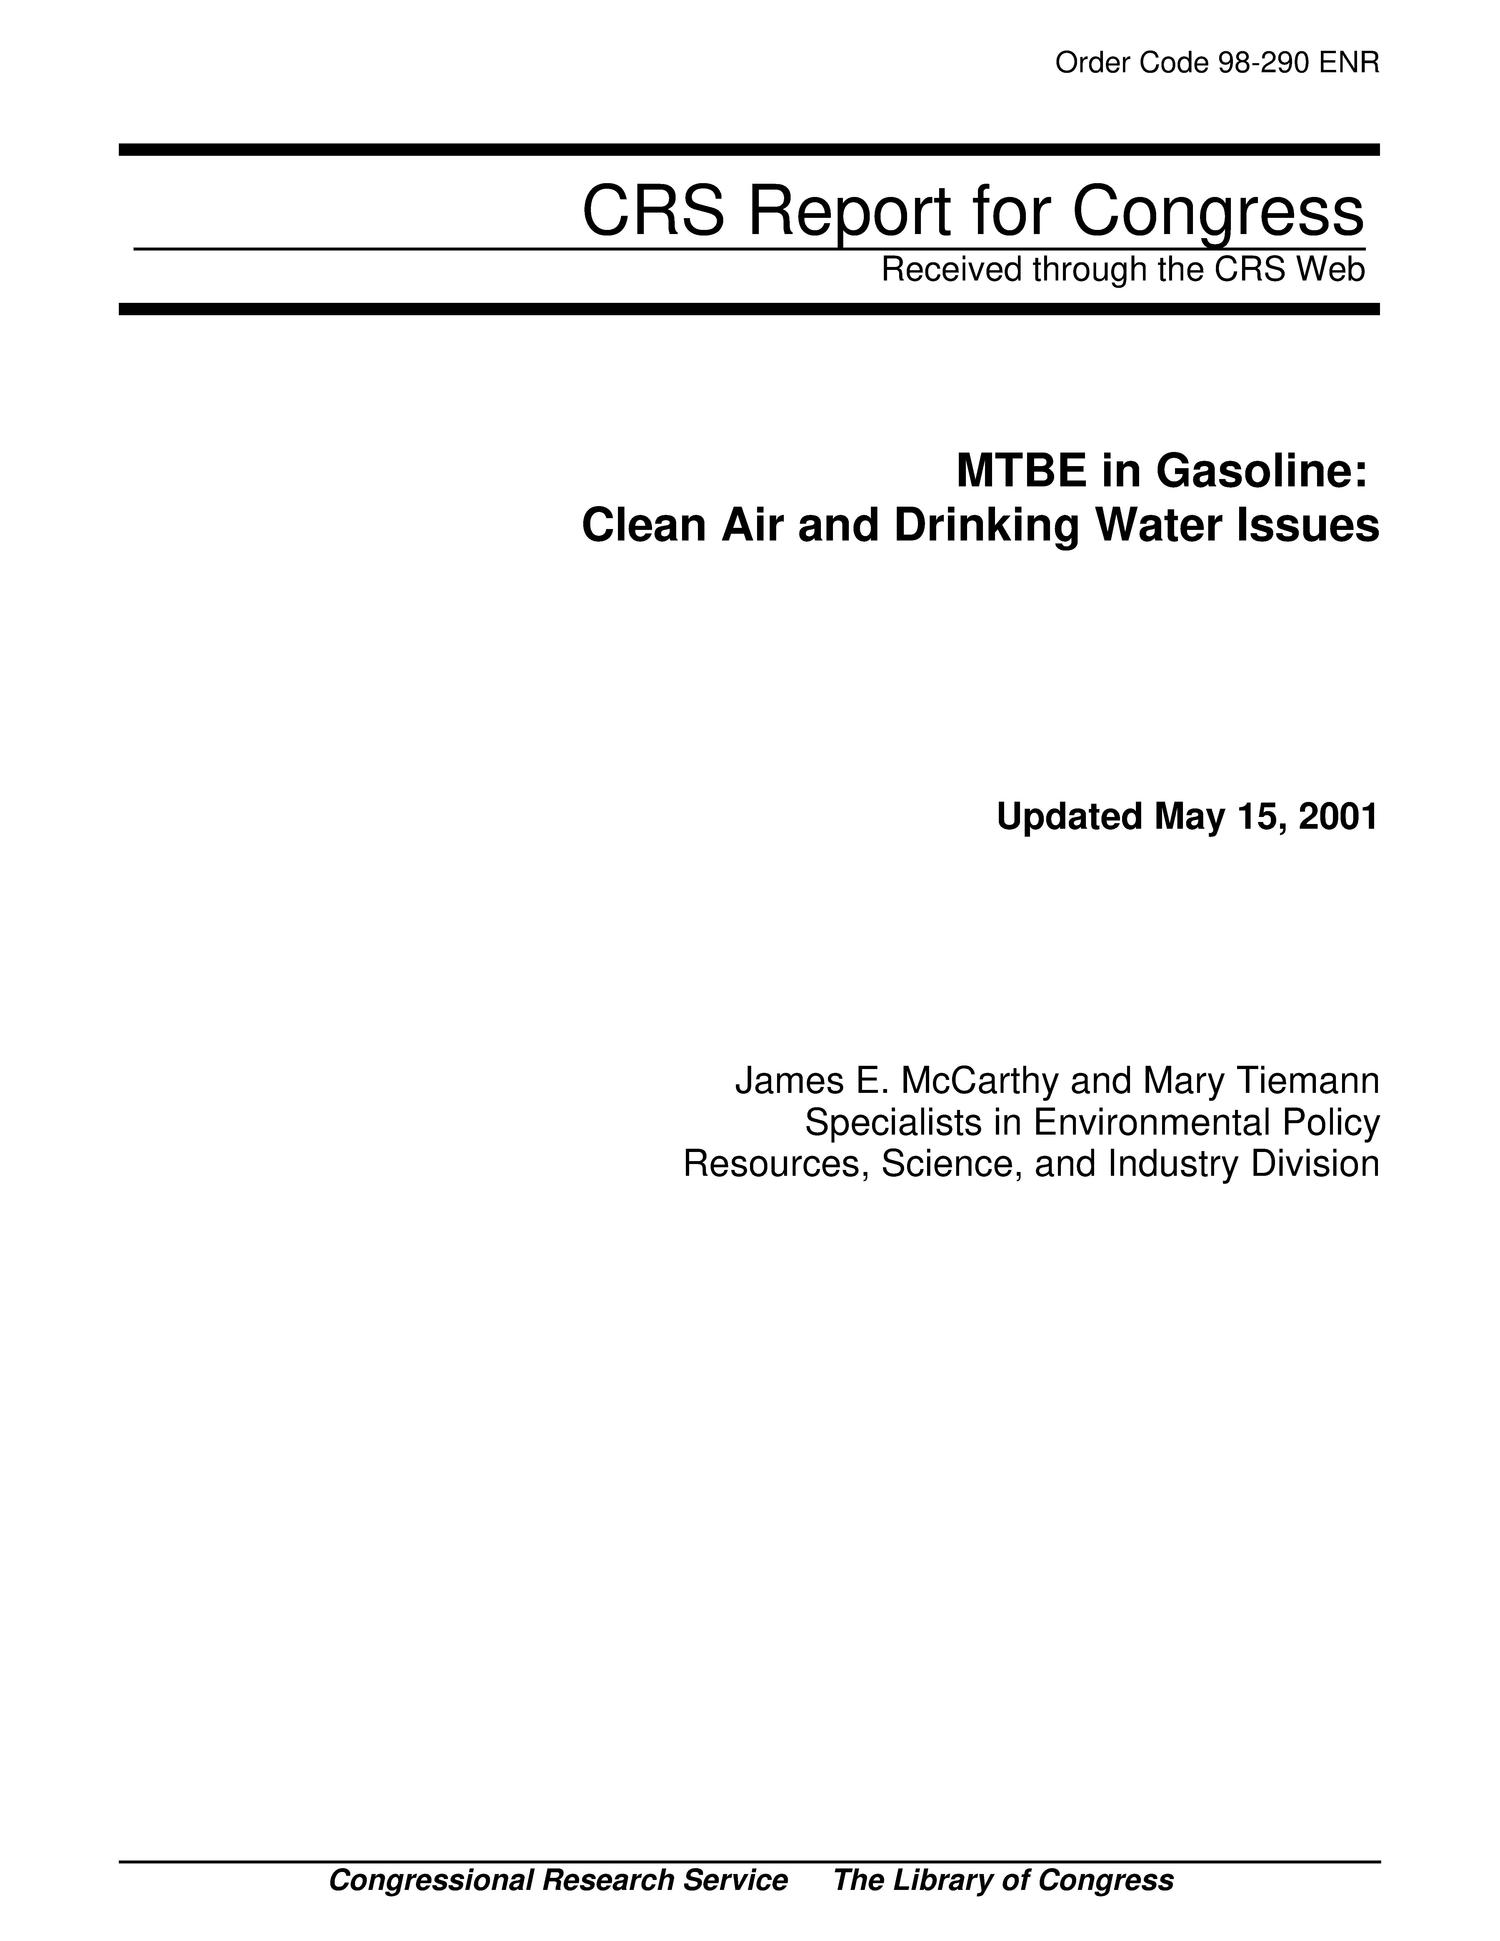 MTBE in Gasoline: Clean Air and Drinking Water Issues
                                                
                                                    [Sequence #]: 1 of 25
                                                